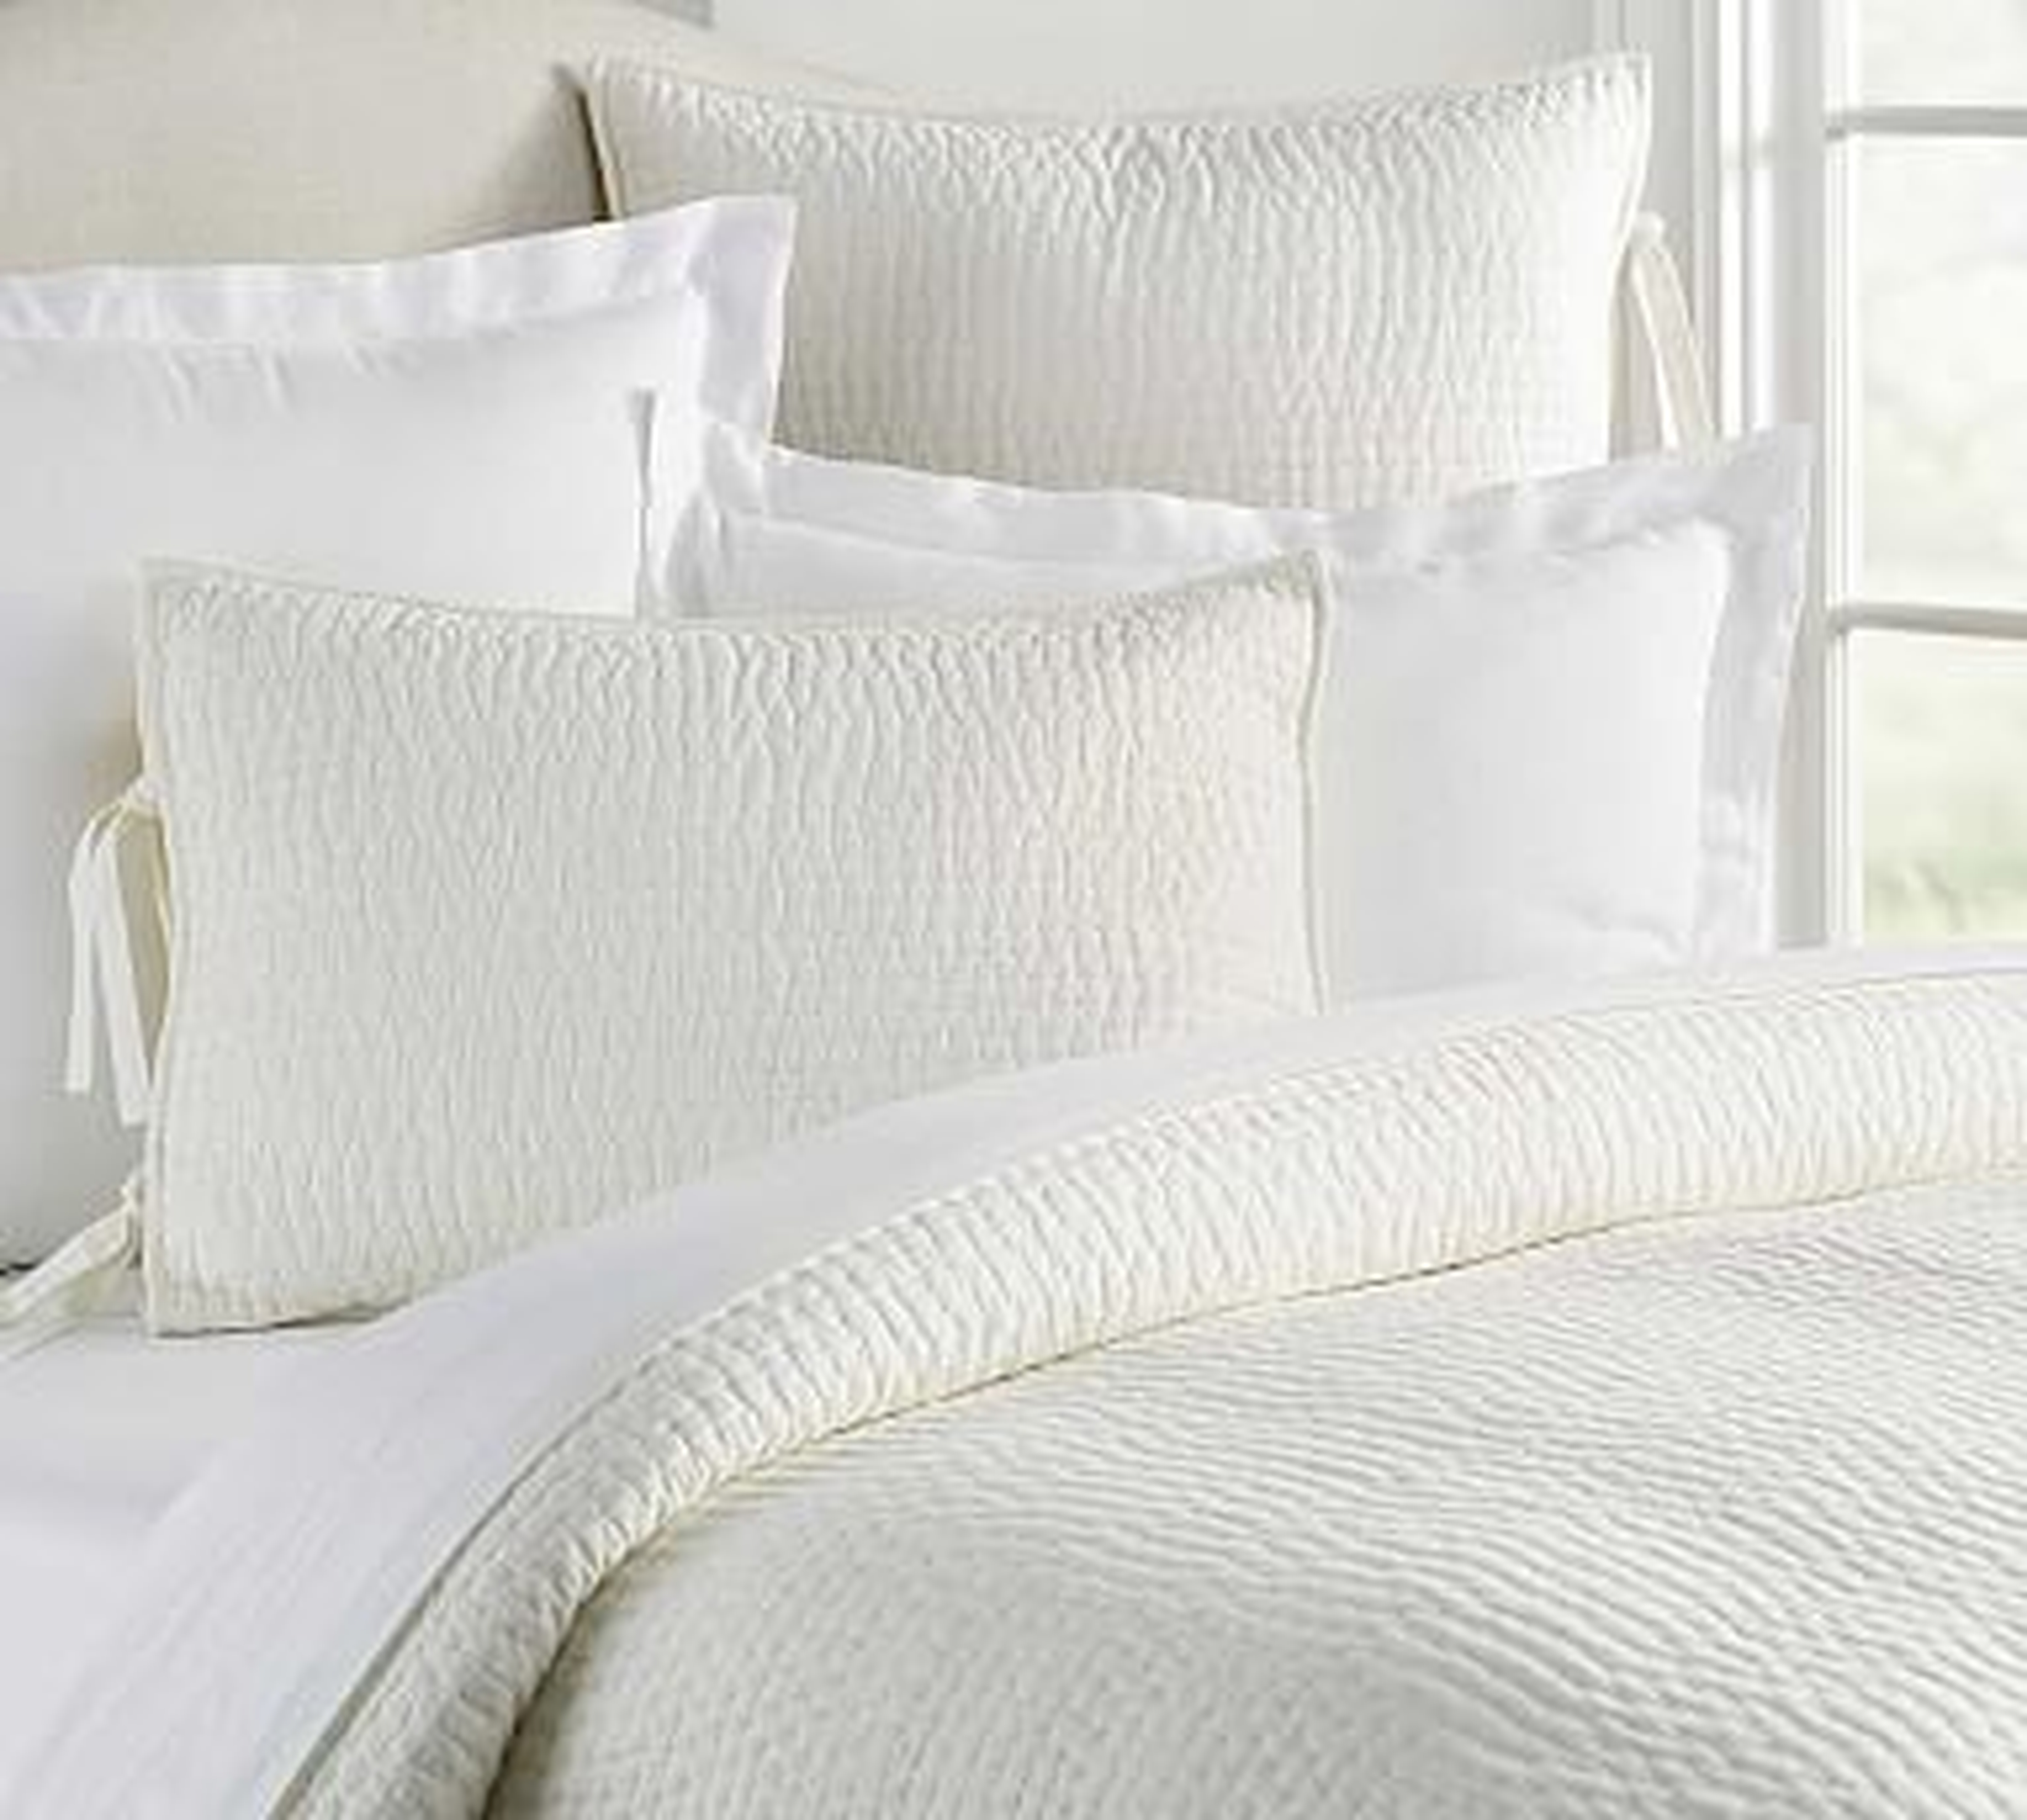 Pick-Stitch Handcrafted Cotton/Linen Quilt, Twin/Twin XL, Classic Ivory - Pottery Barn